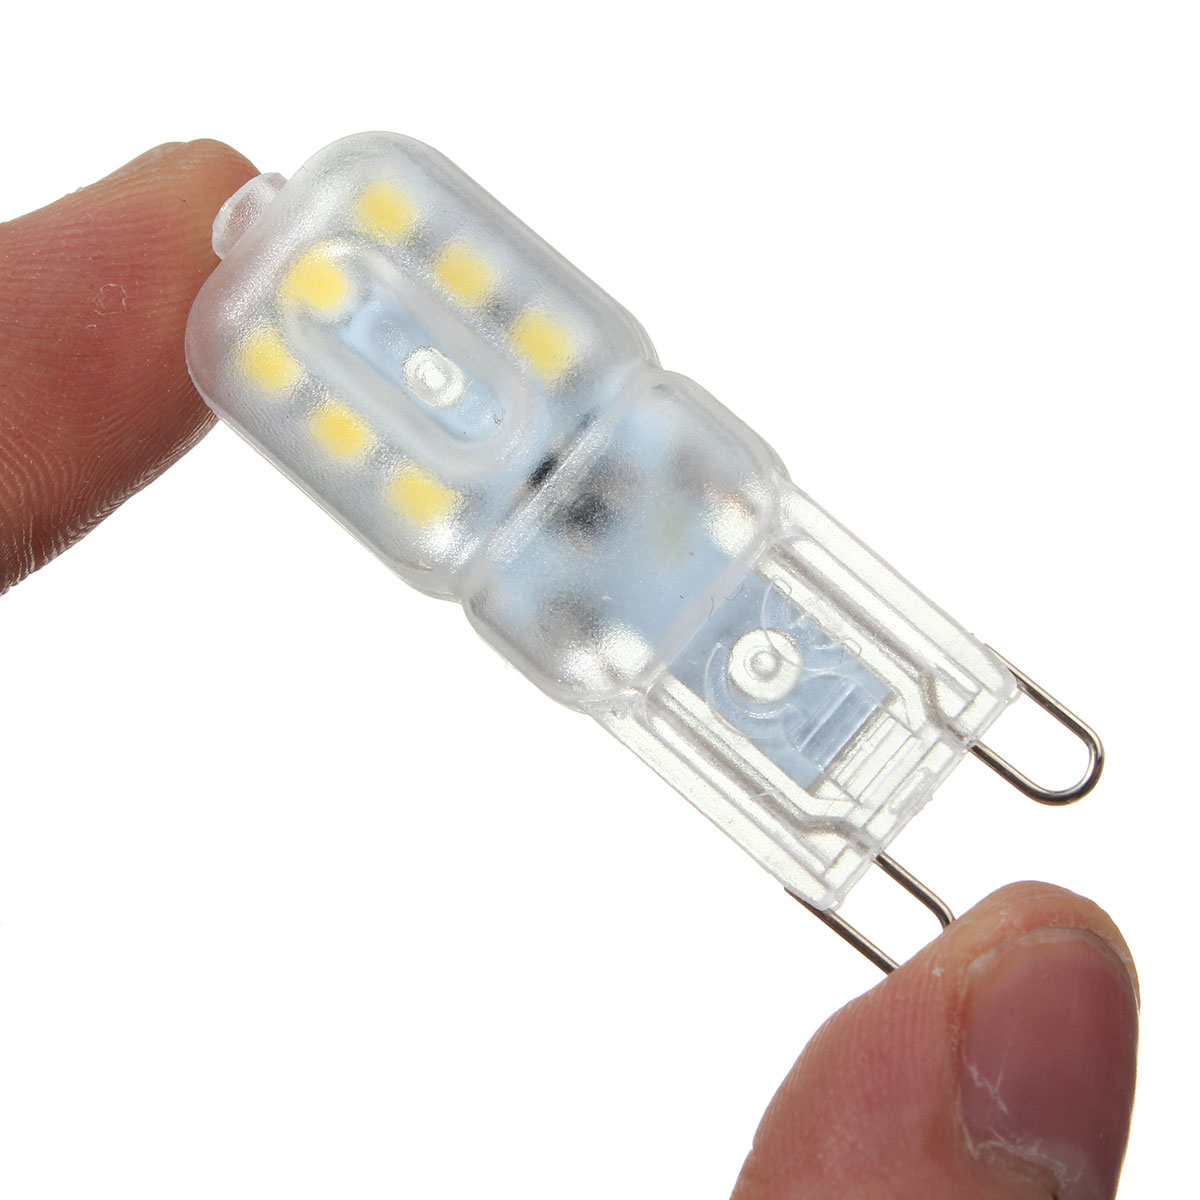 Dimmable-G9-25W-14-SMD-2835-LED-Pure-White-Warm-White-Natural-White-Light-Lamp-Bulb-AC110VAC220V-1073443-8